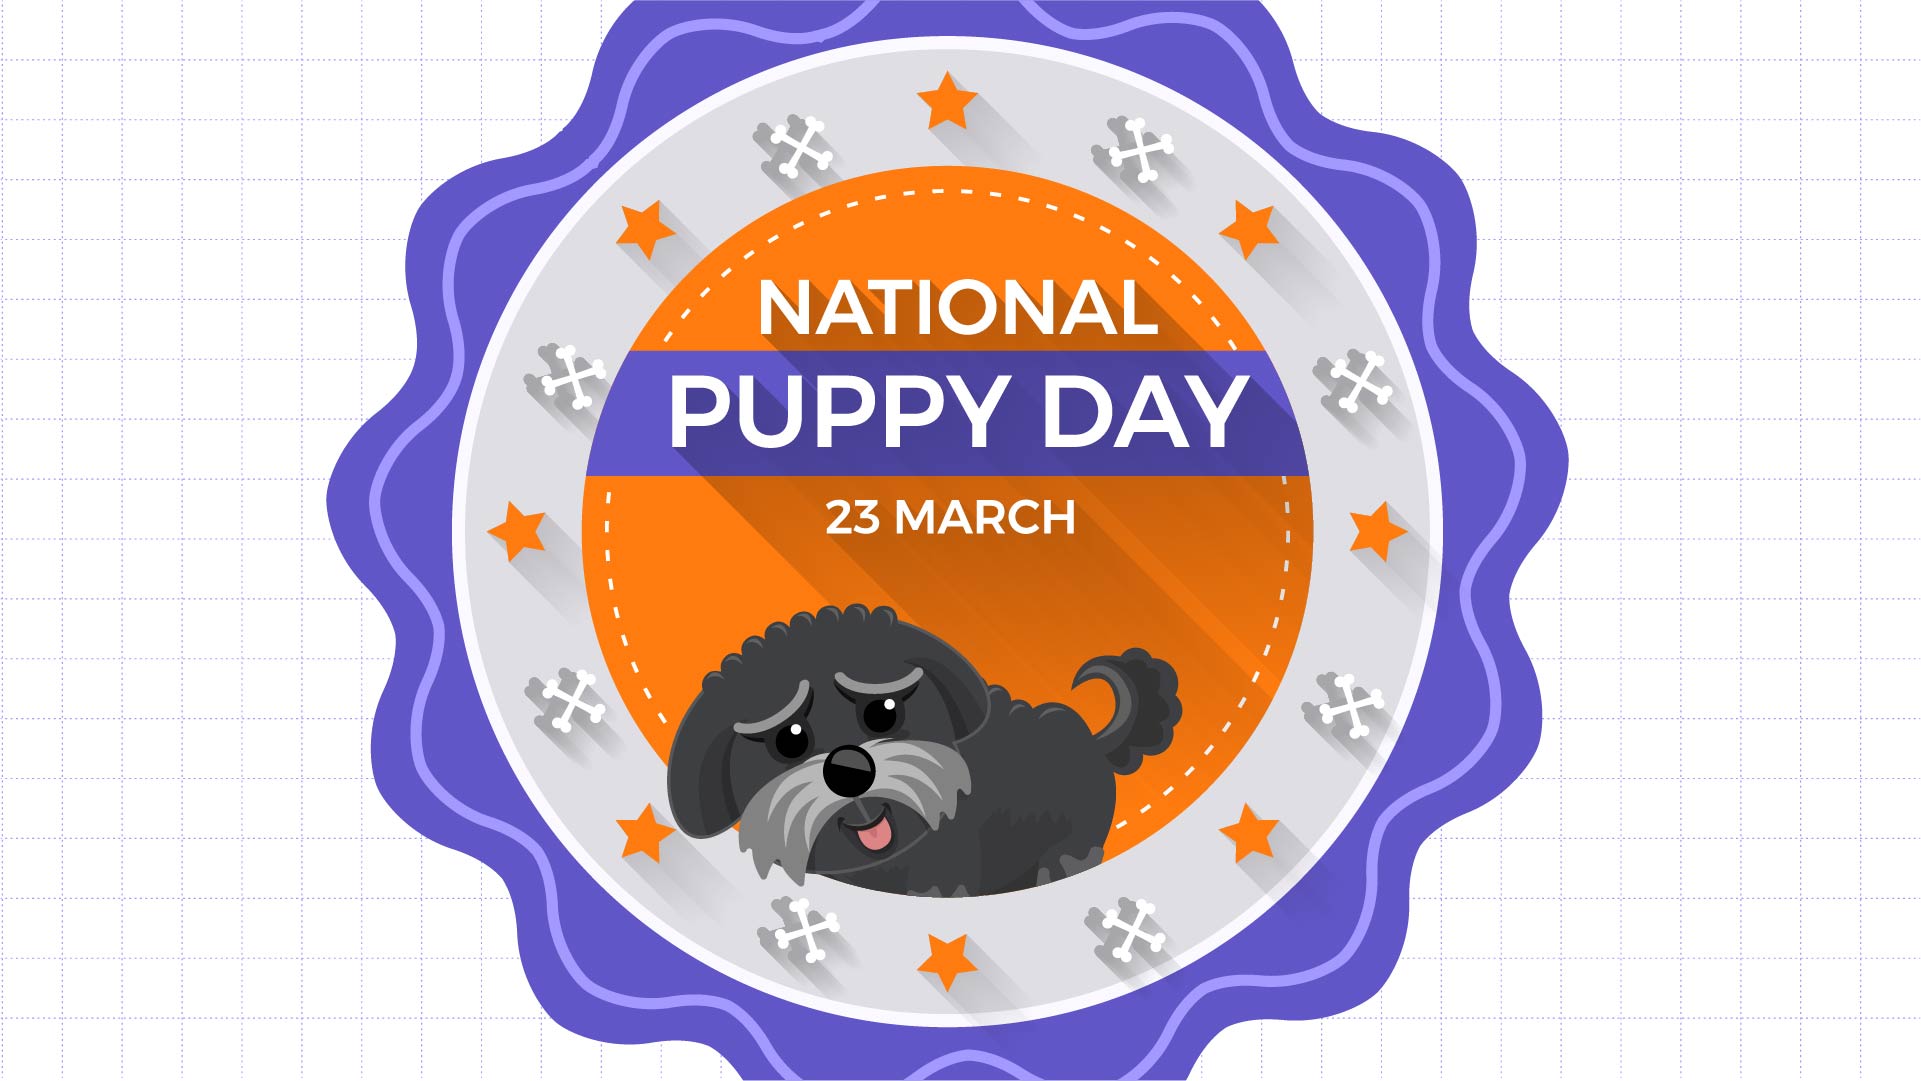 Grid background with squiggly purple circle interlaced with a a black puppy and text that says National Puppy Day 23 March